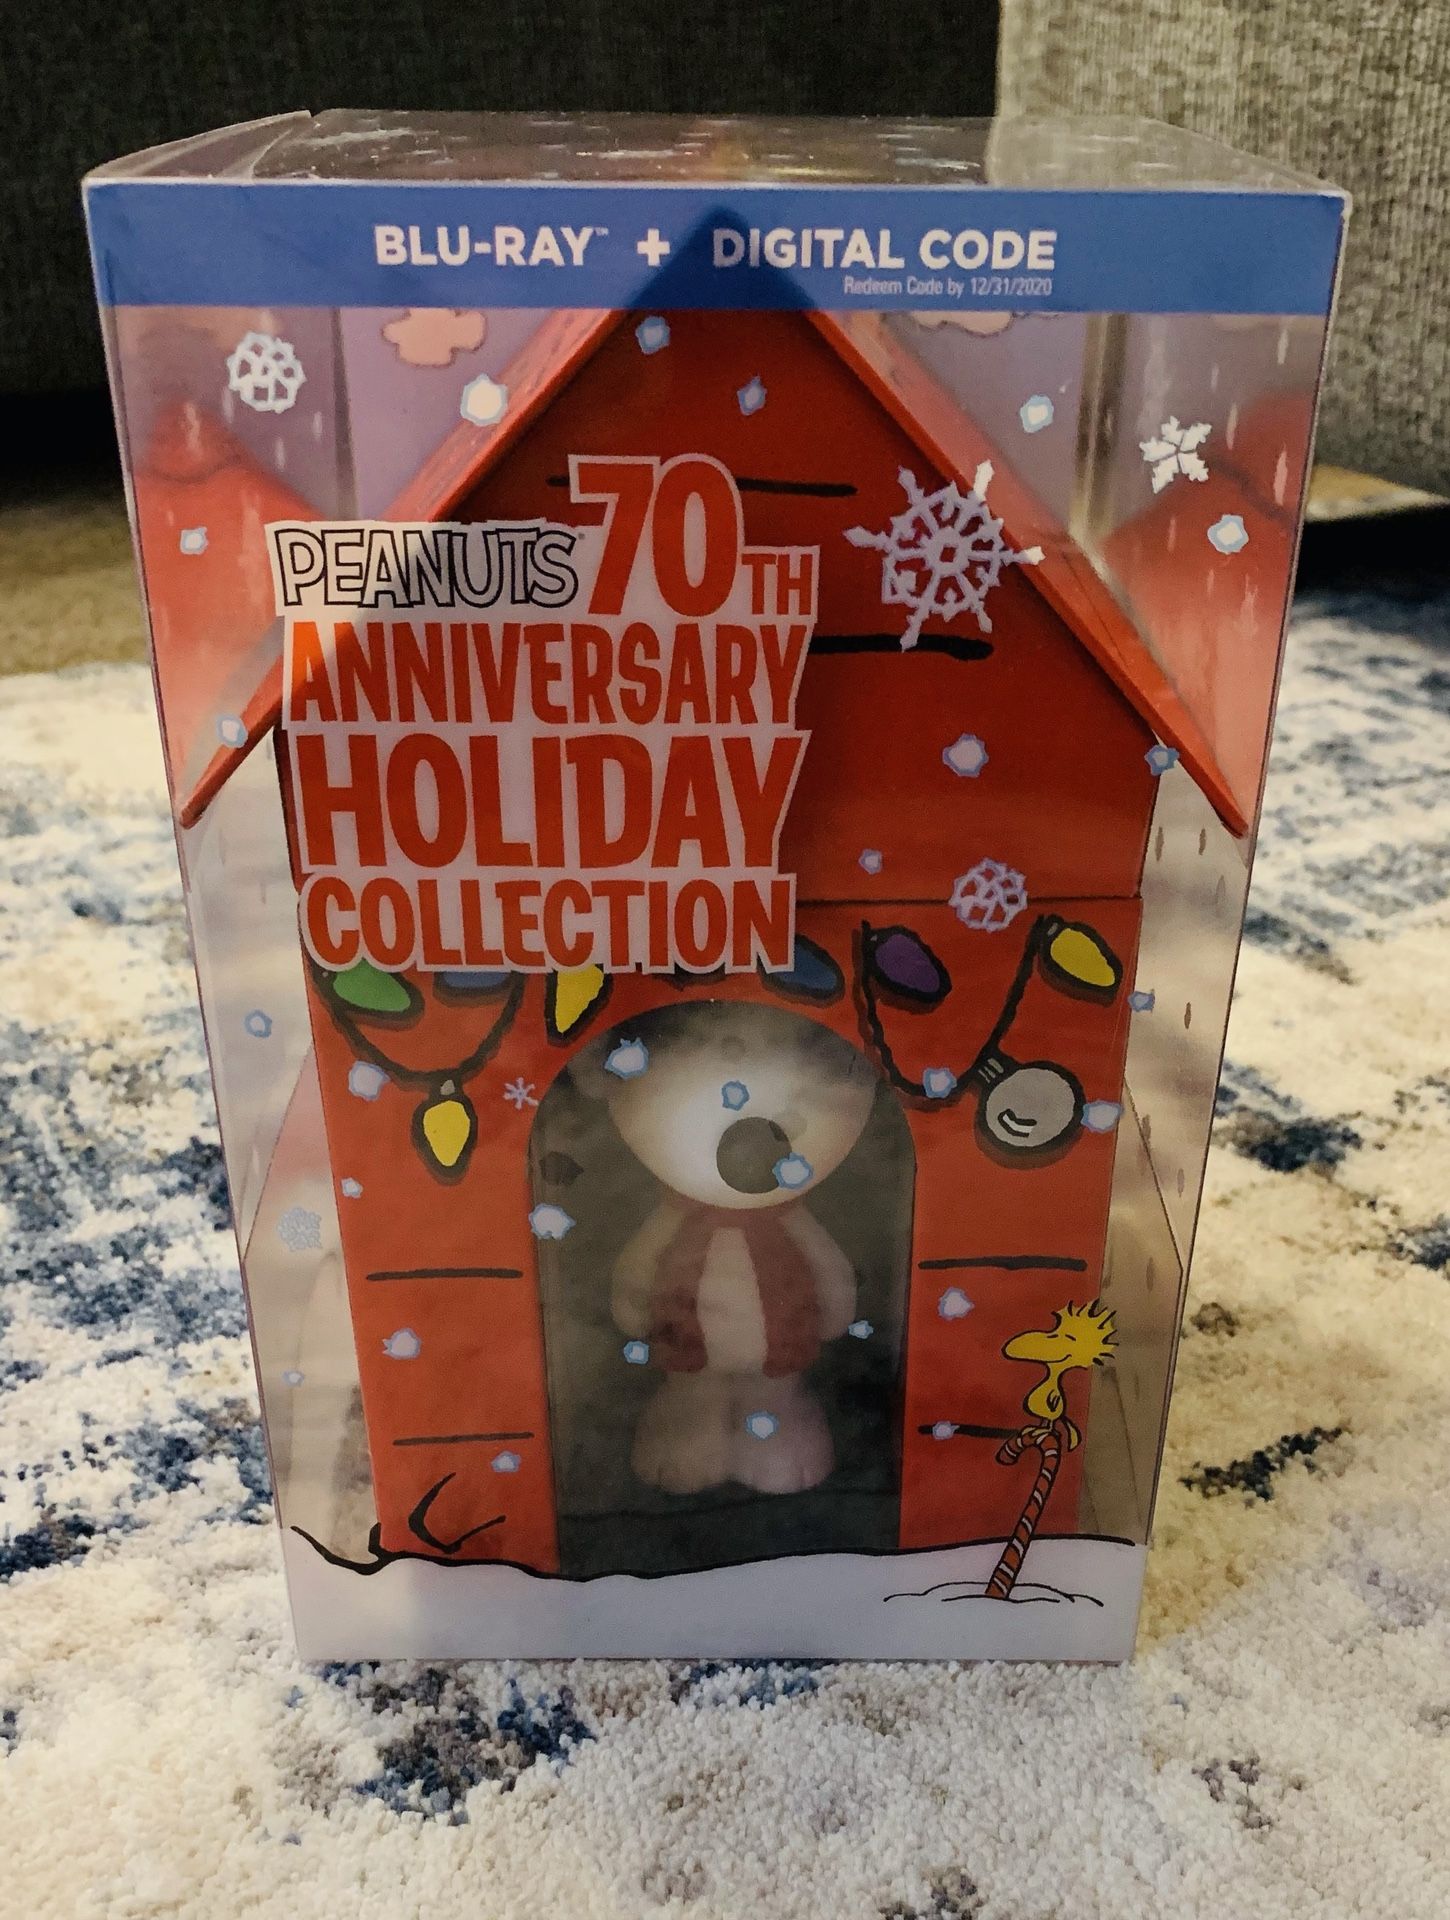 Peanuts 70th Anniversary HOLIDAY COLLECTION Bluray Limited Edition Charlie Brown.